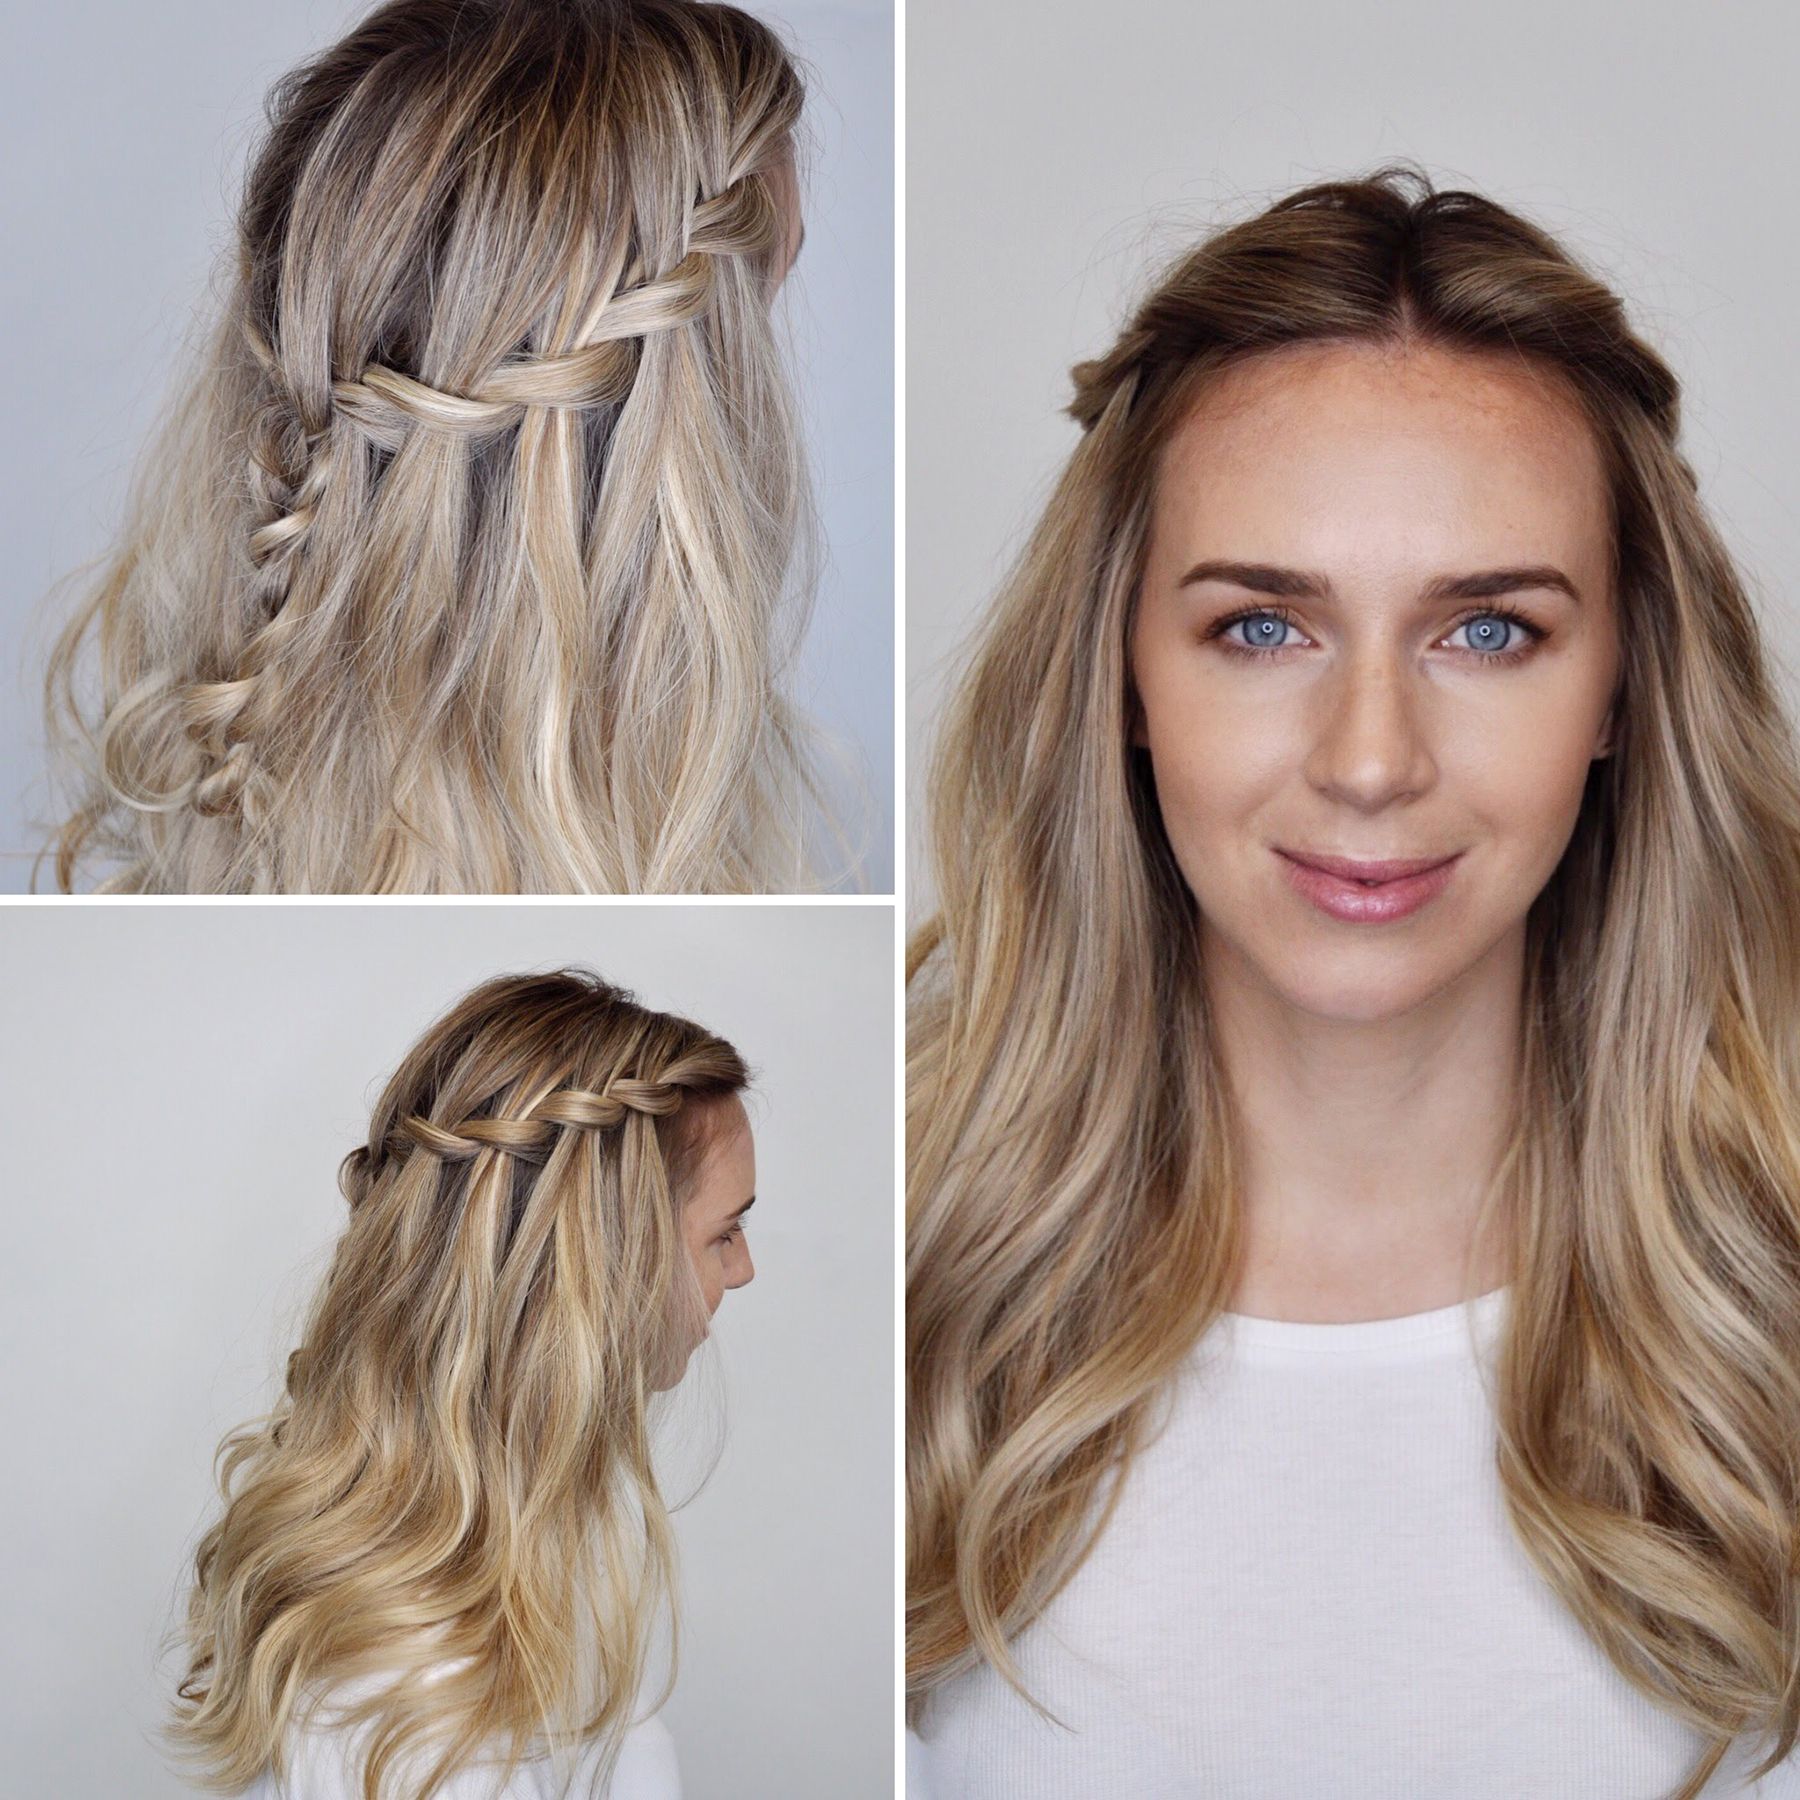 How To Do A Waterfall Braid (View 1 of 20)